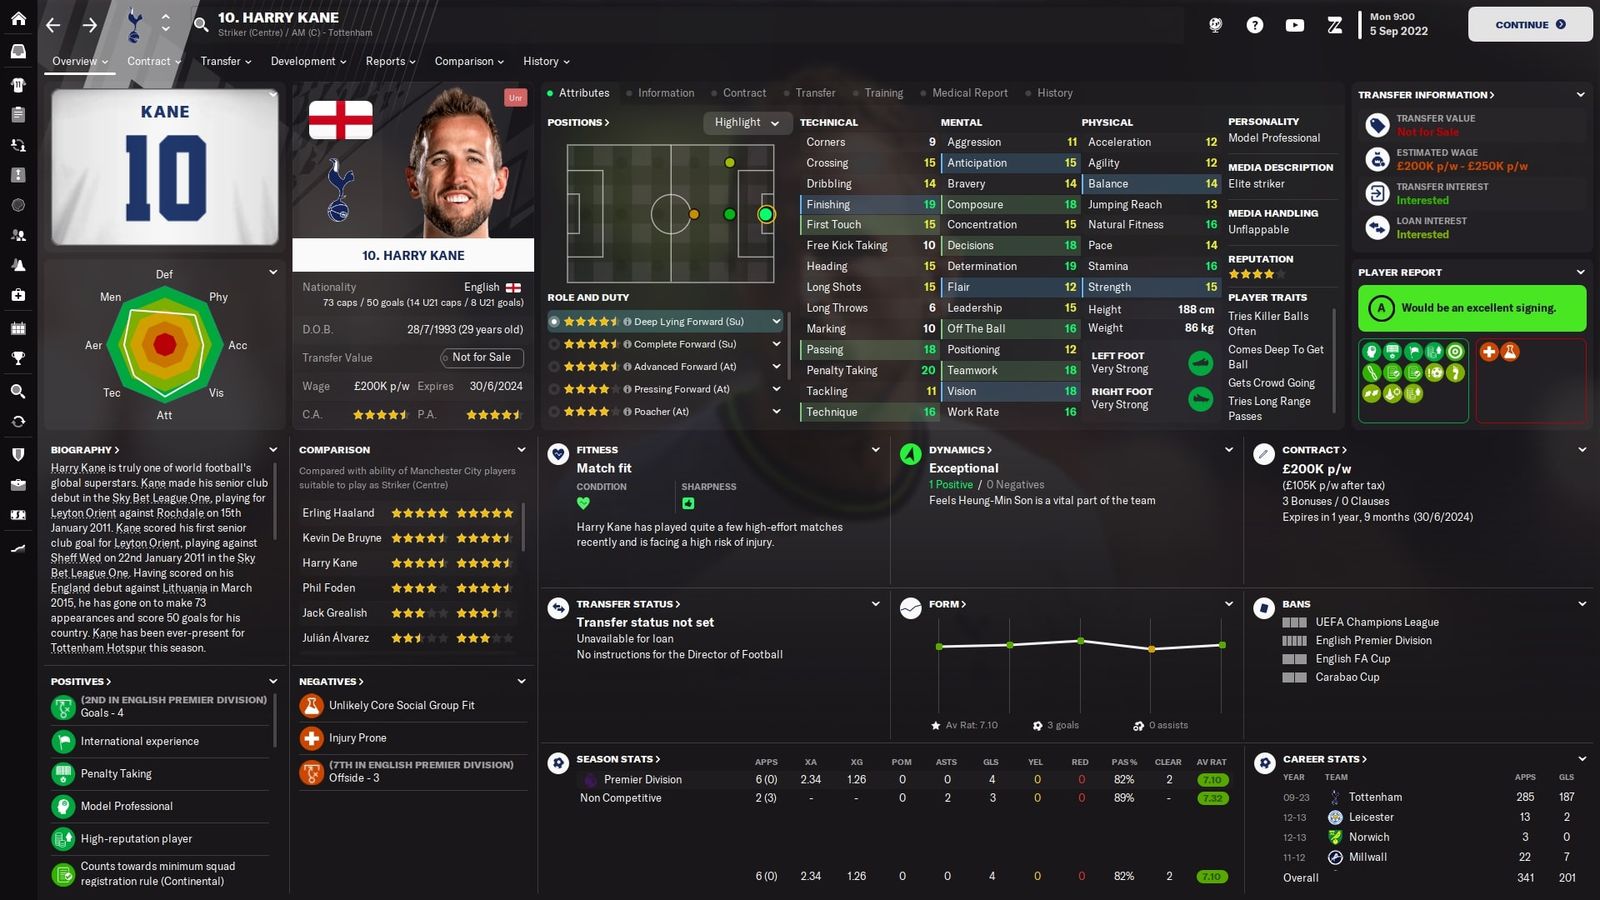 best fm23 skins - zealand skin with sleek player overview page